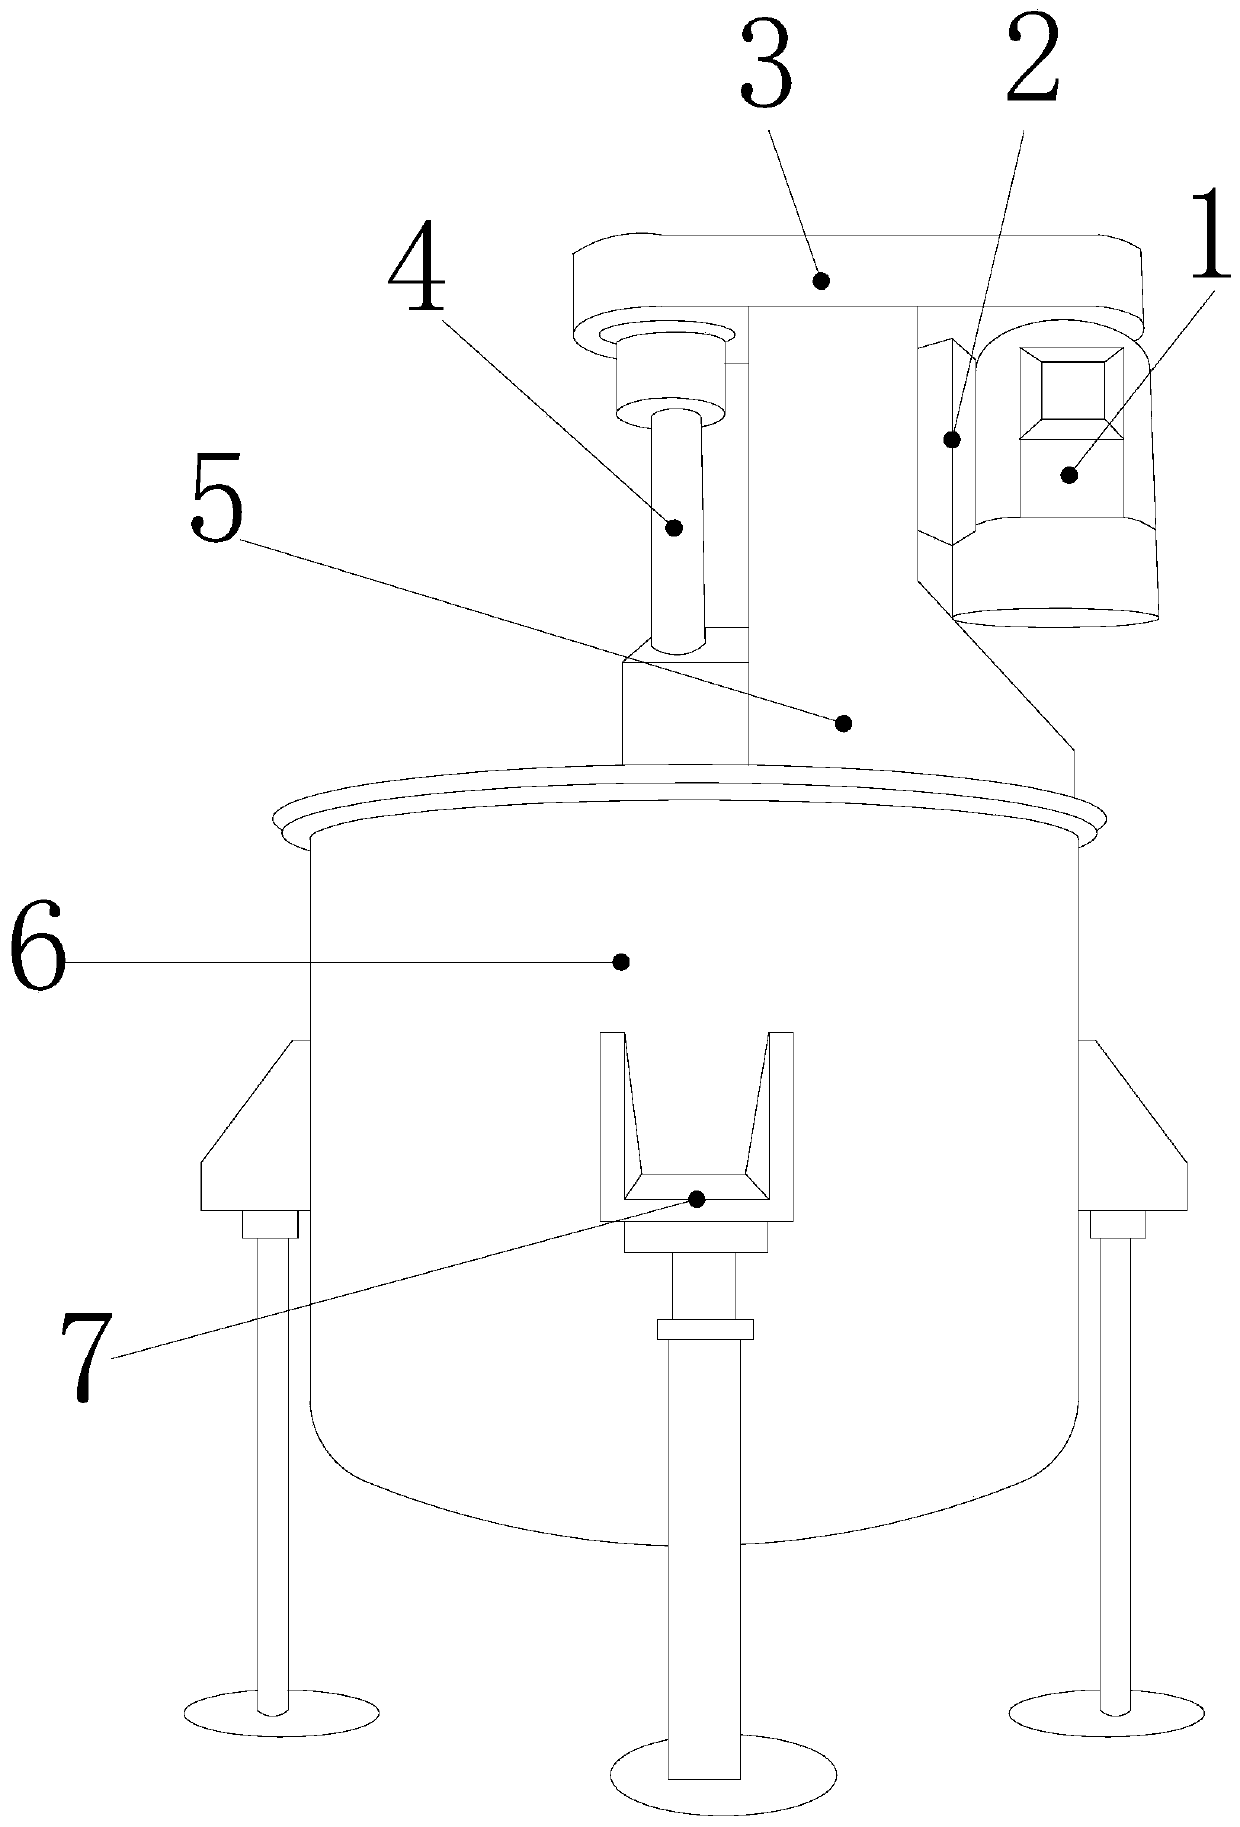 Double-ring differential centrifugal pressure vacuum pouring system with enhanced ceramic density